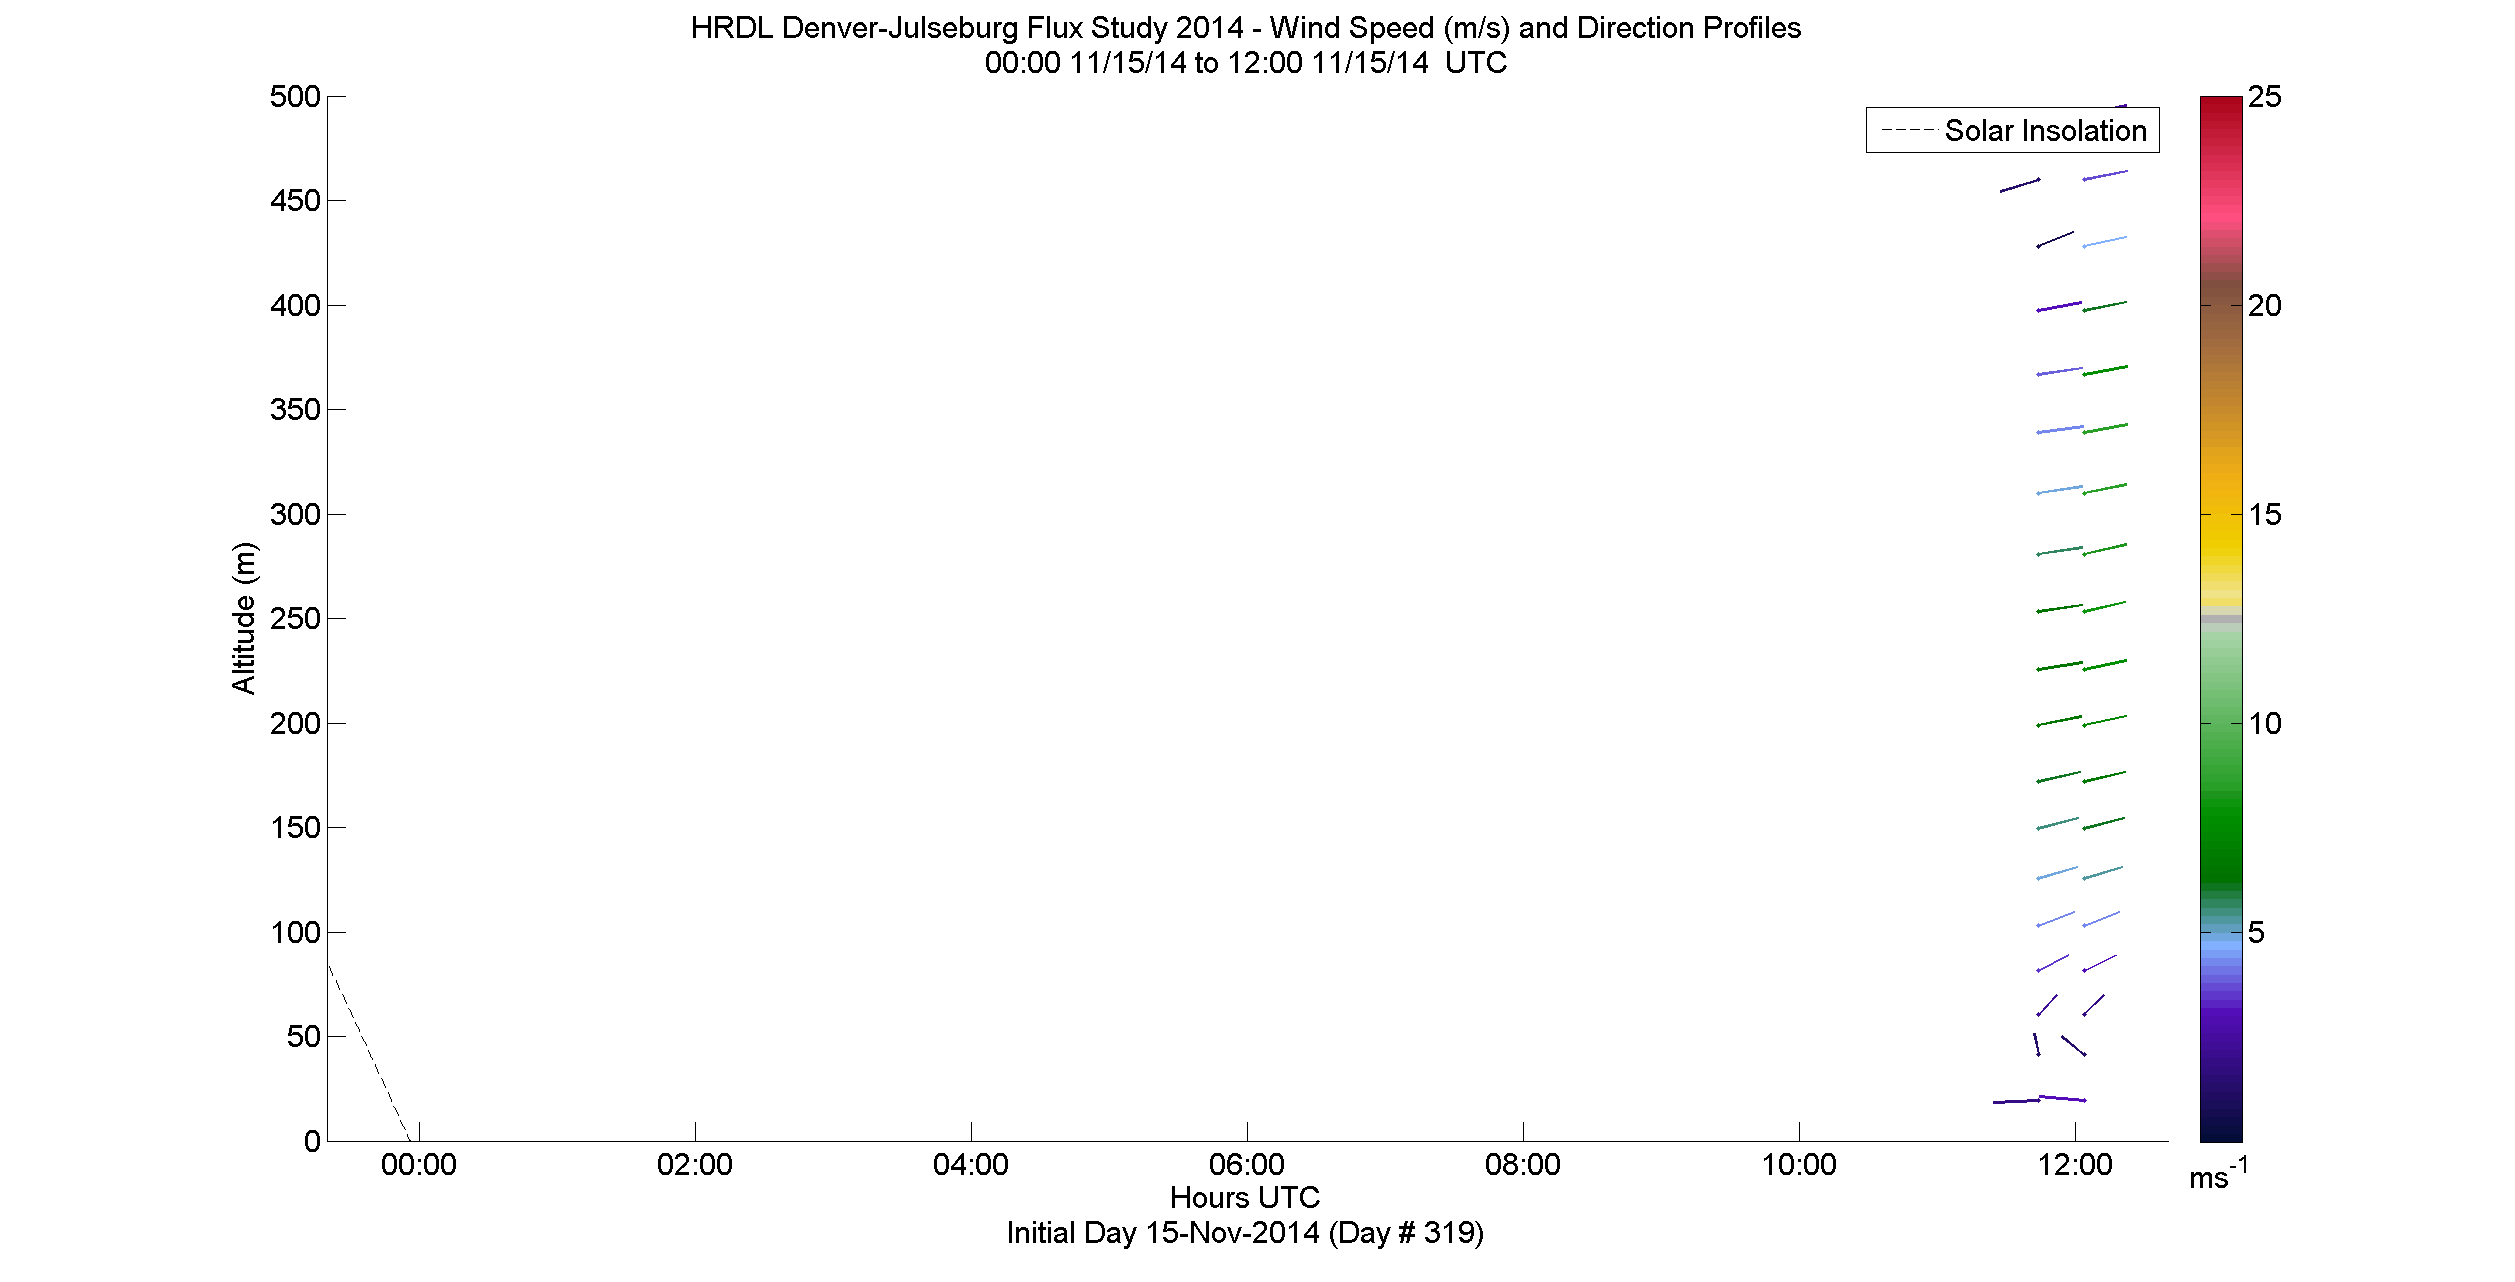 HRDL speed and direction profile - November 15 am